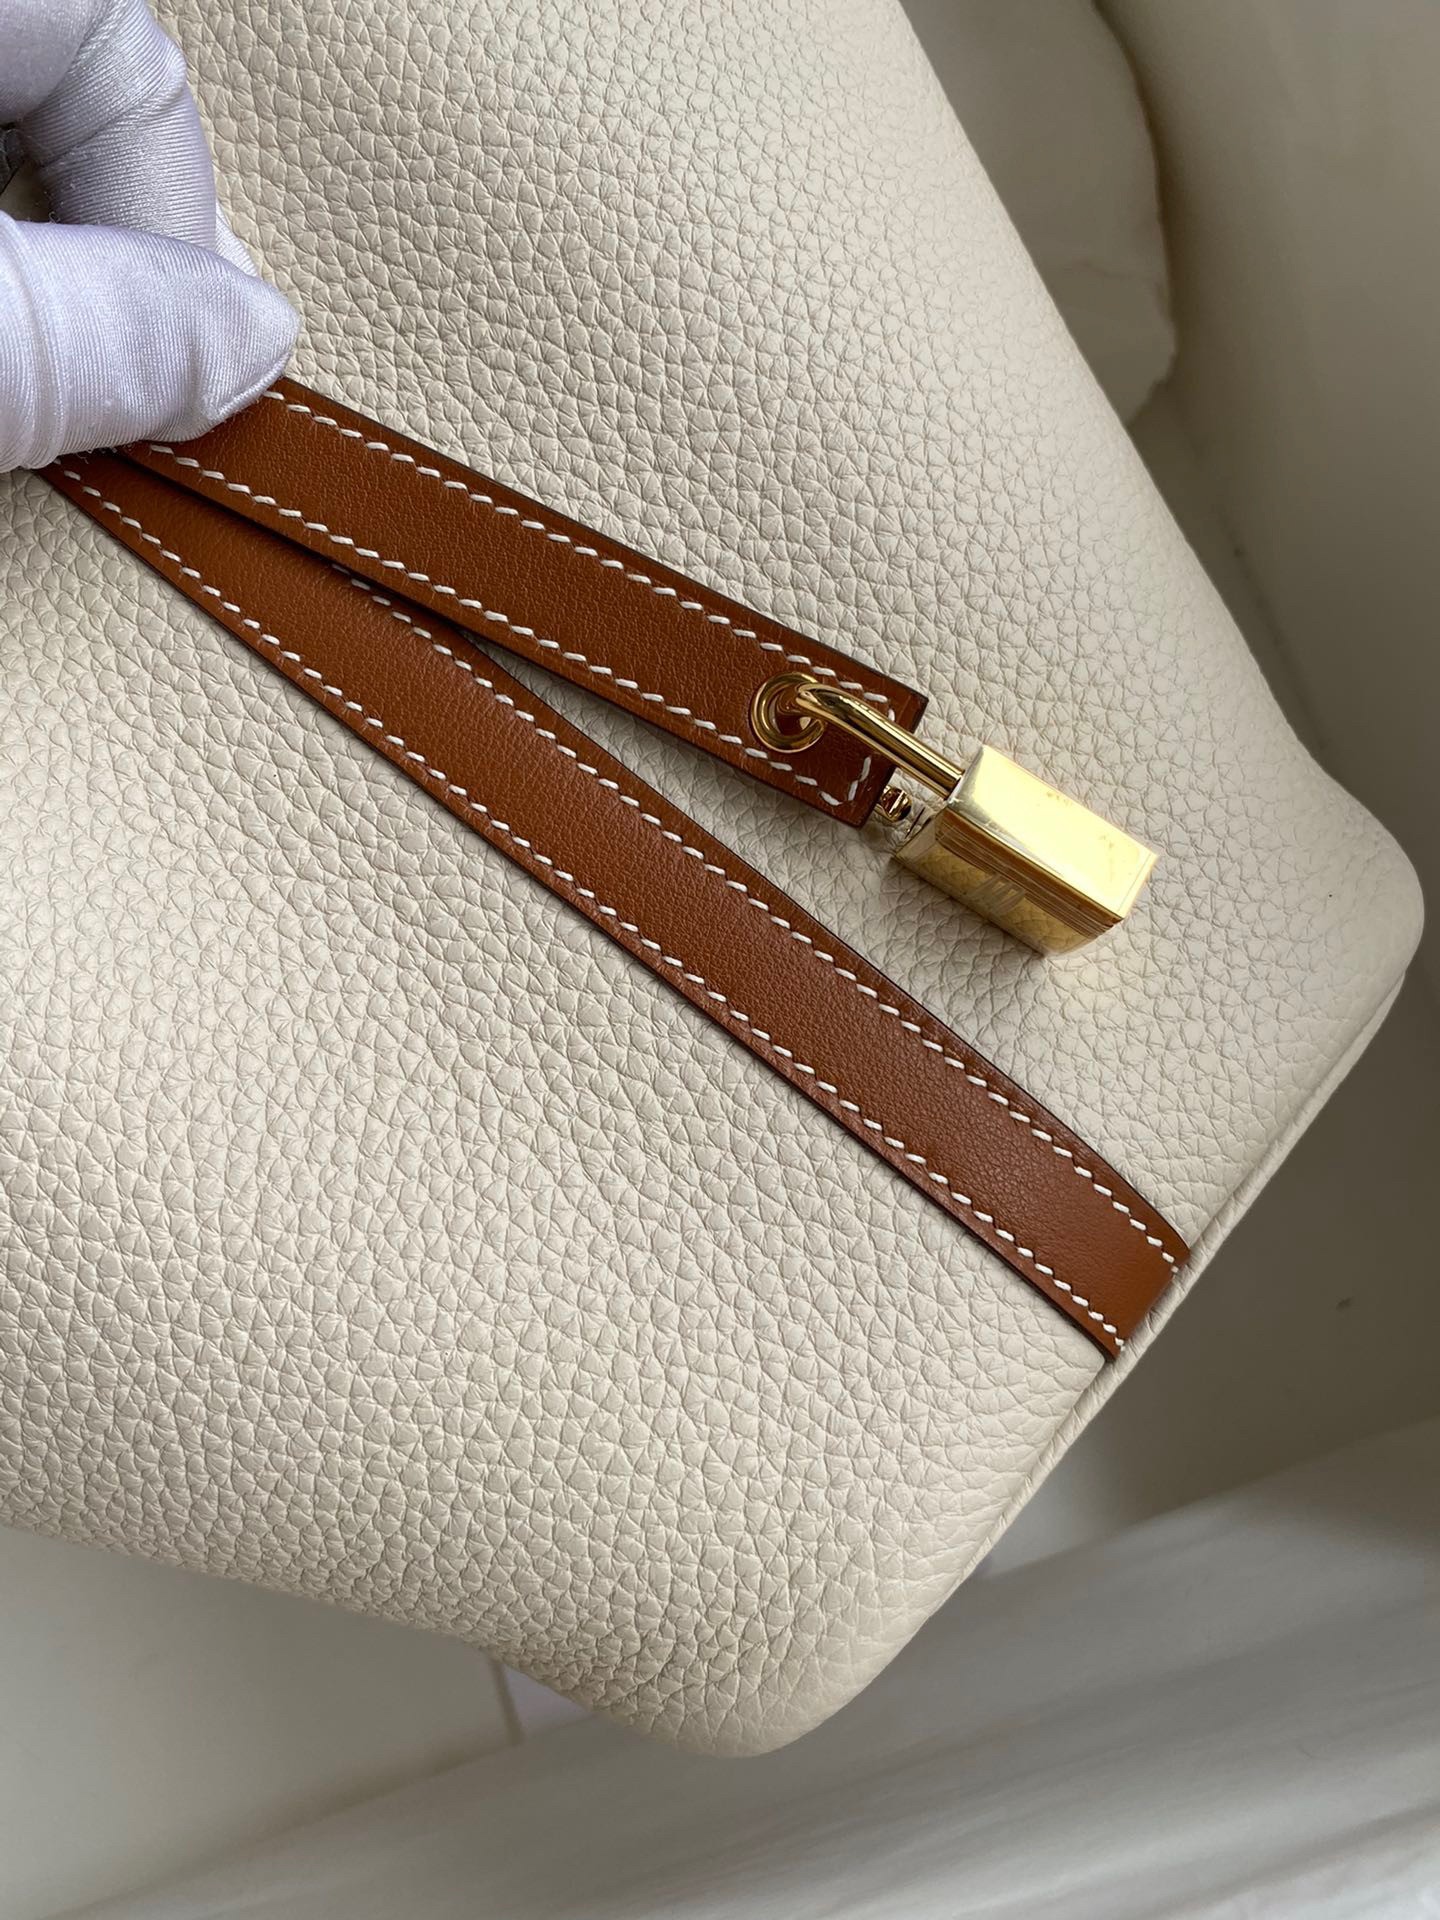 Replica Hermes Picotin Lock 18 Bag In Gold Clemence Leather